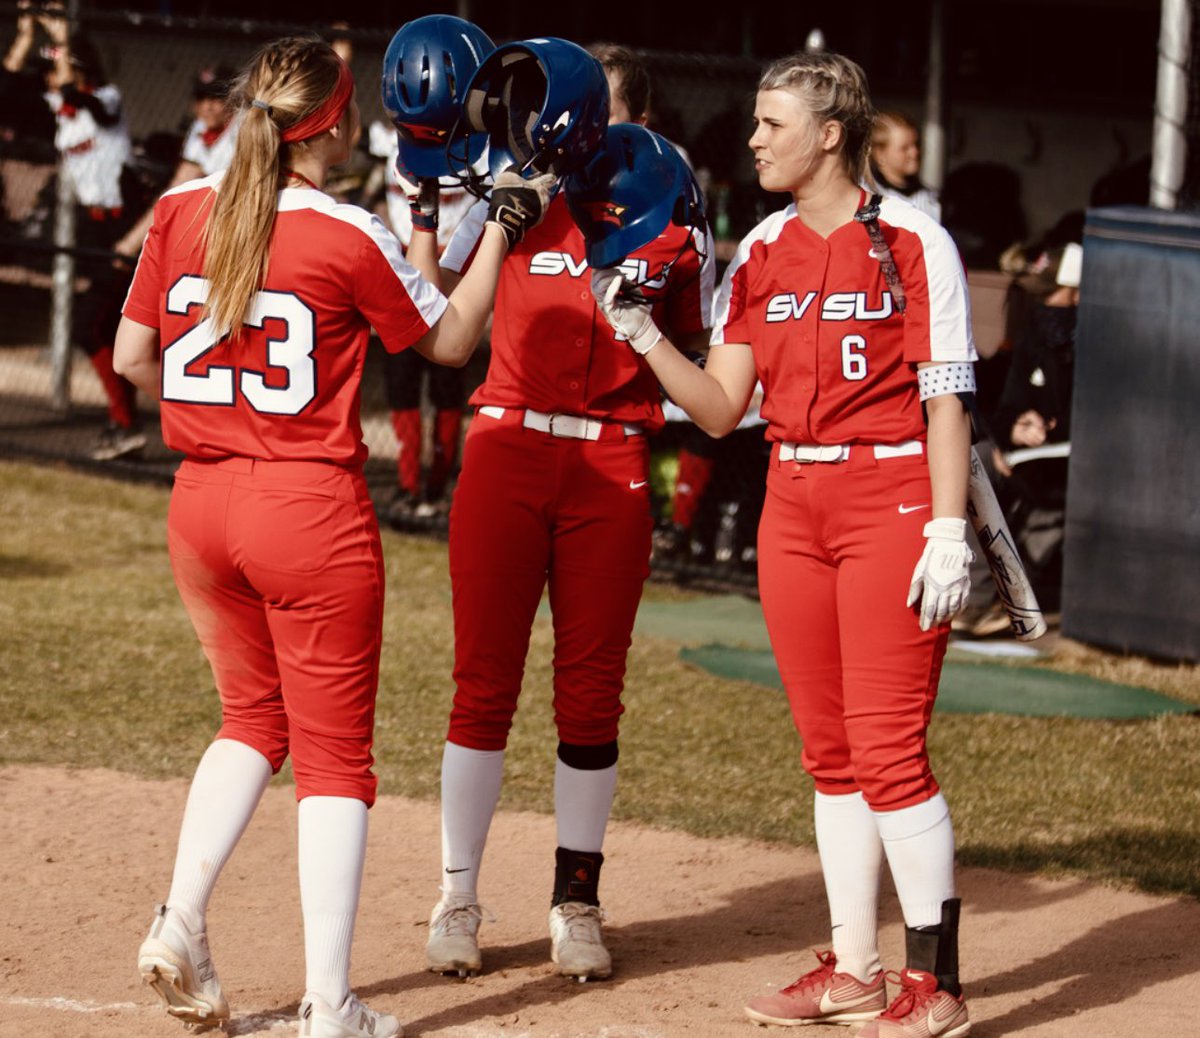 TOURNEY TIME 💪🏻 Your Lady Cardinals take on the Wayne State Warriors in Game 1 of the GLIAC Tournament at Sports Force Park. First pitch will be at approximately 10am! #gliacsb #svsusb #paintitred #cardstrong